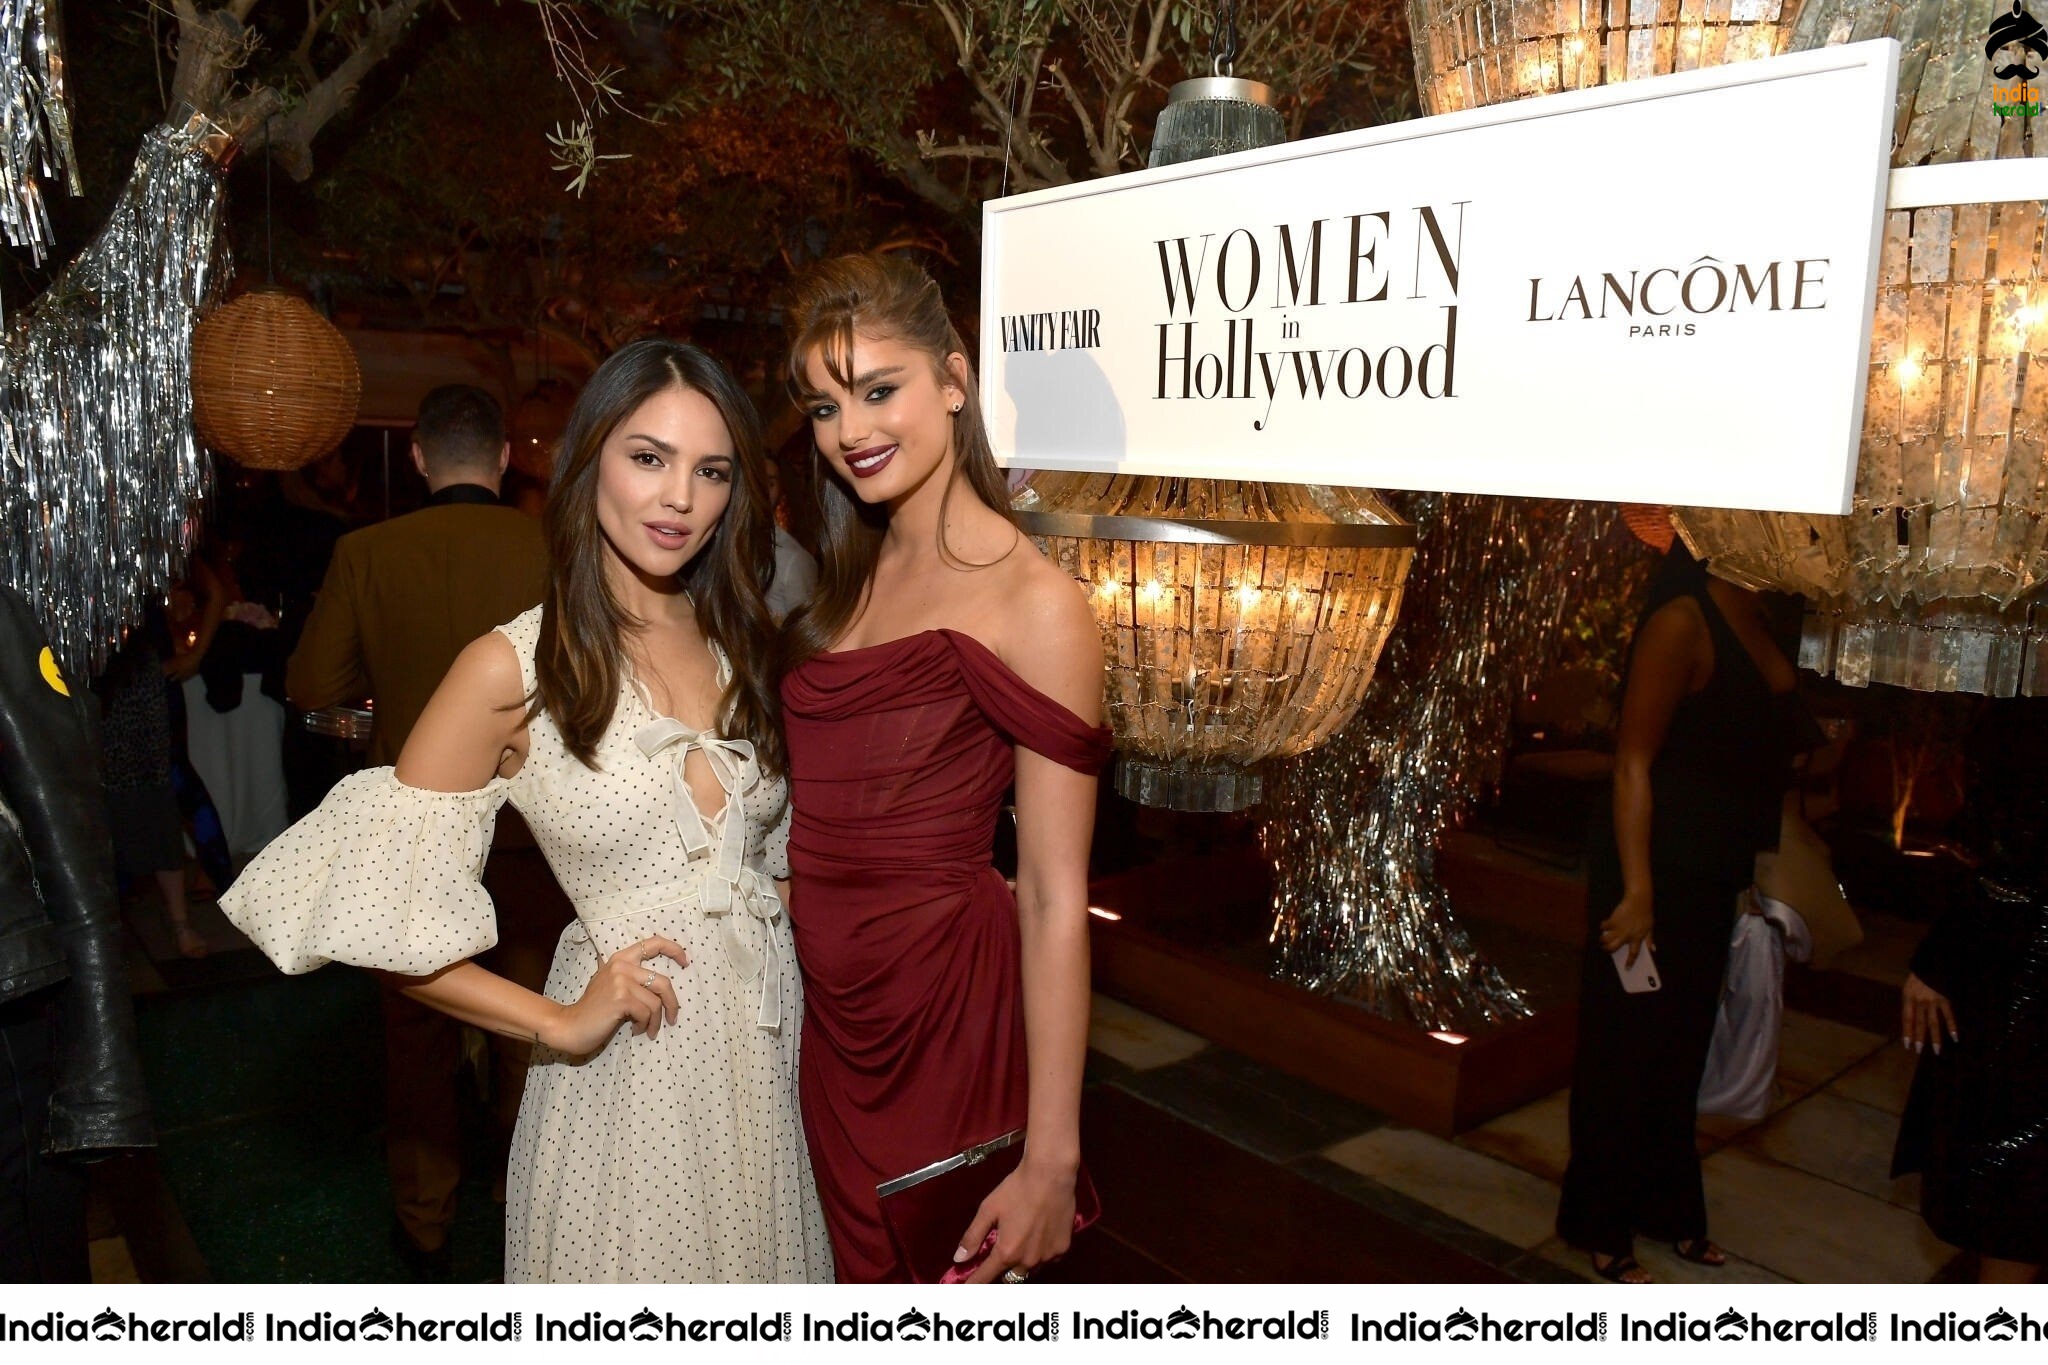 Eiza Gonzalez at Vanity Fair and Lancome Women in Hollywood Celebration